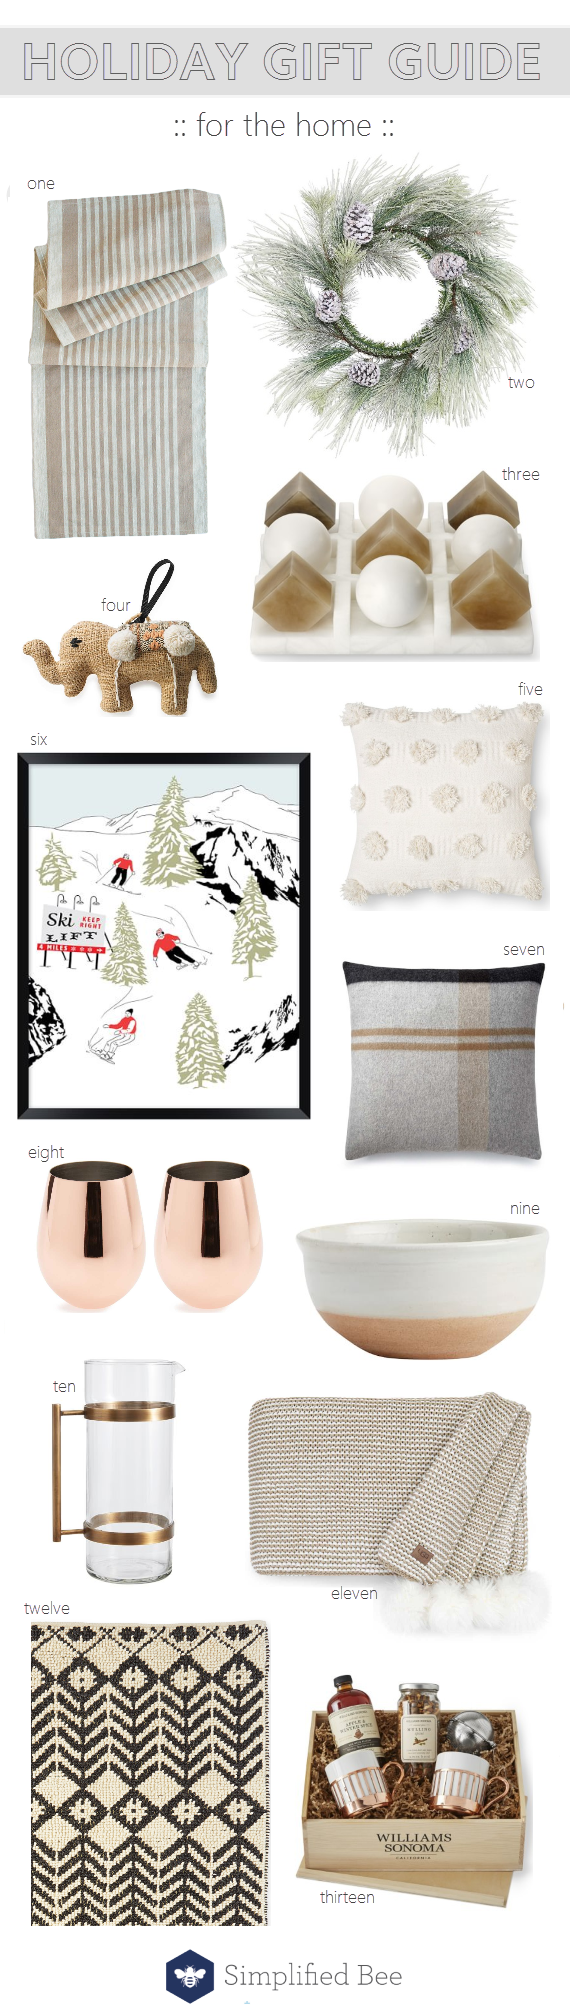 holiday gift guide for home // @simplifiedbee #giftguide #homedecor #holidaygifts